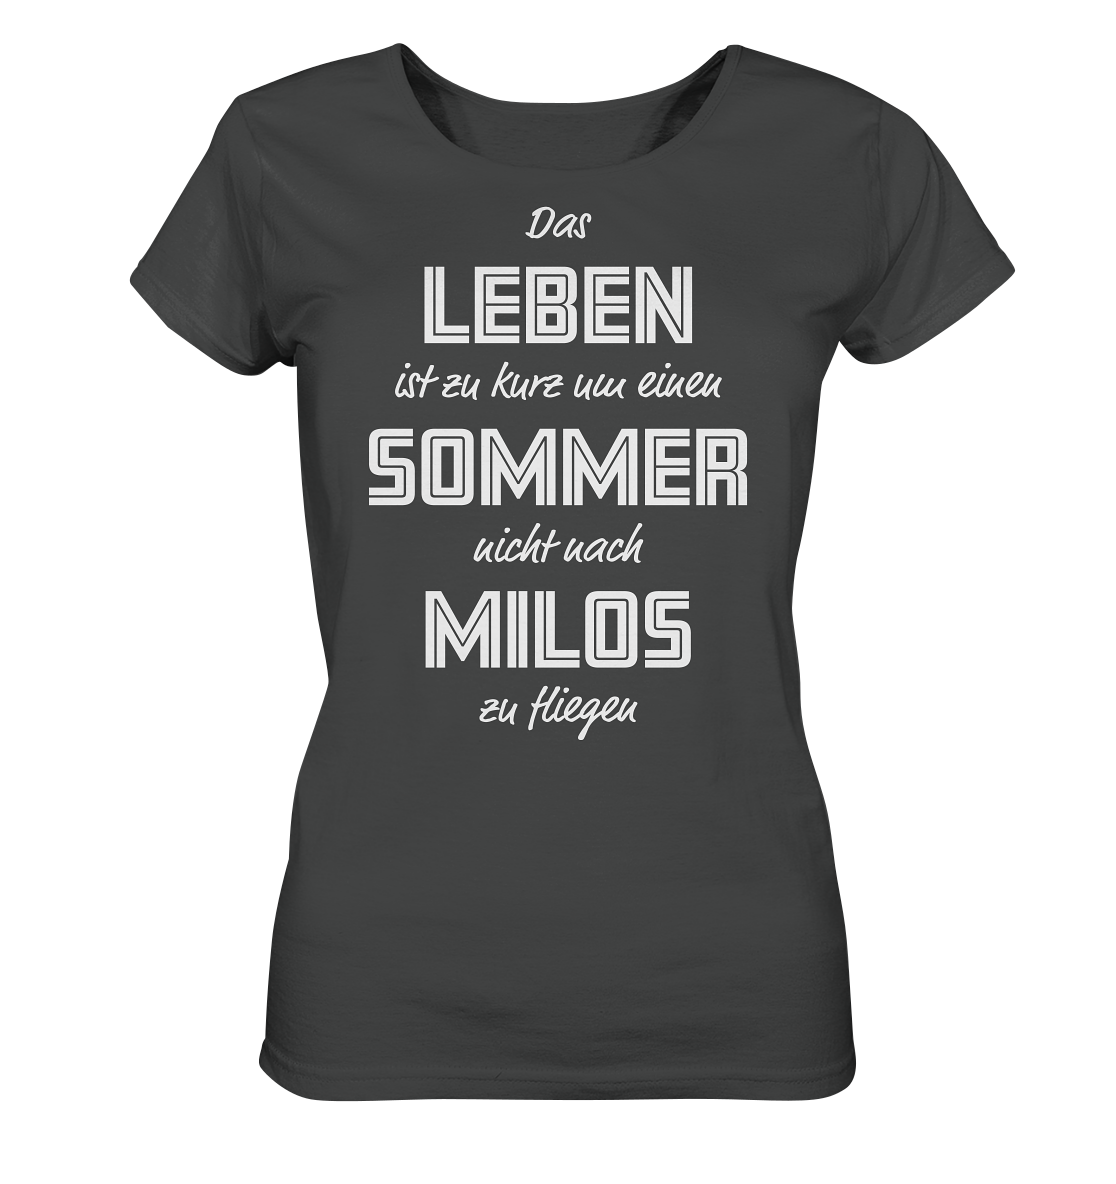 Life is too short not to fly to Milos for a summer - Ladies Organic Shirt